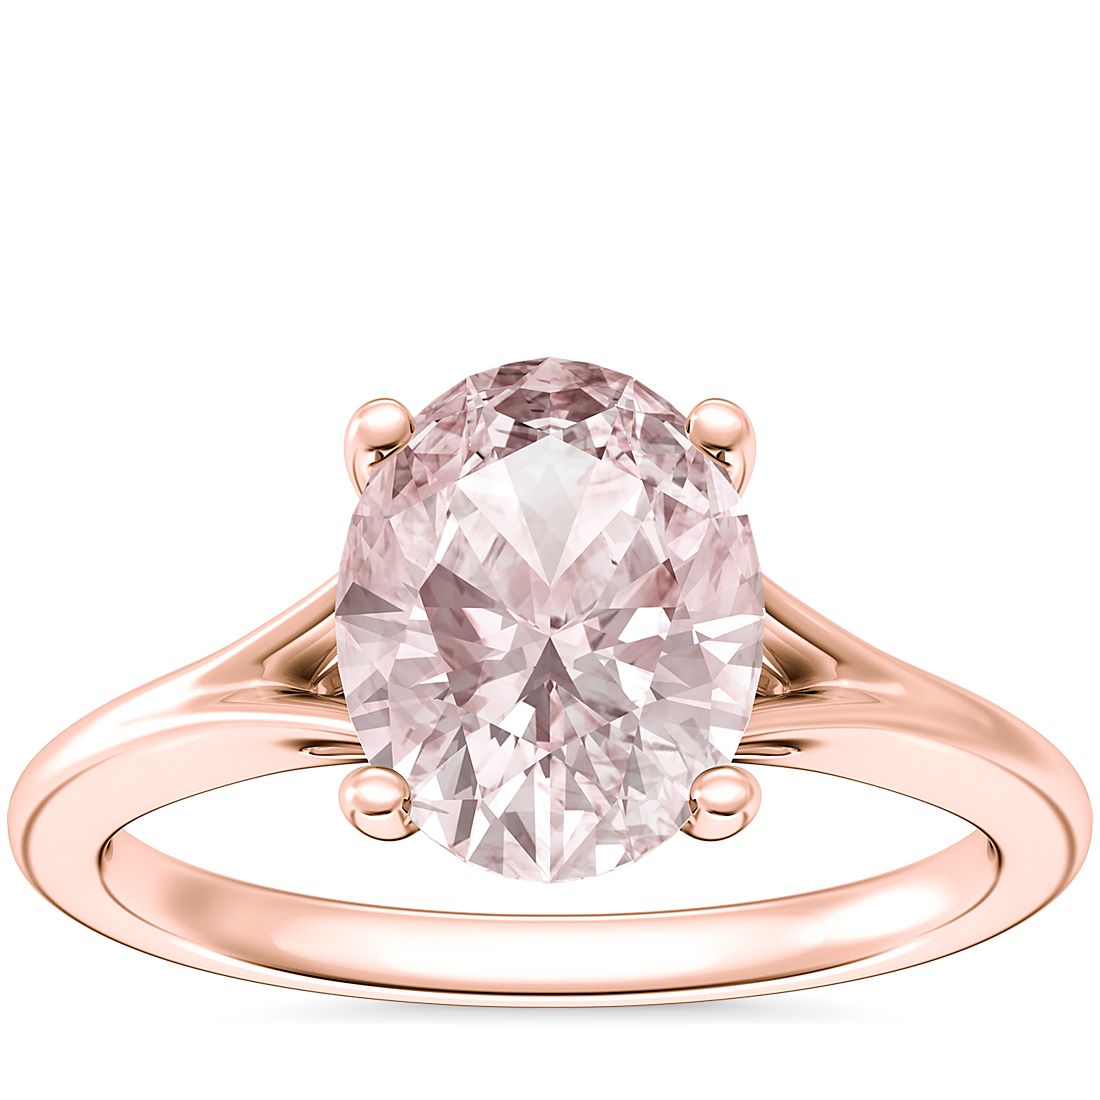 Petite Split Shank Solitaire Engagement Ring with Oval Morganite in 14k Rose Gold (9x7mm)